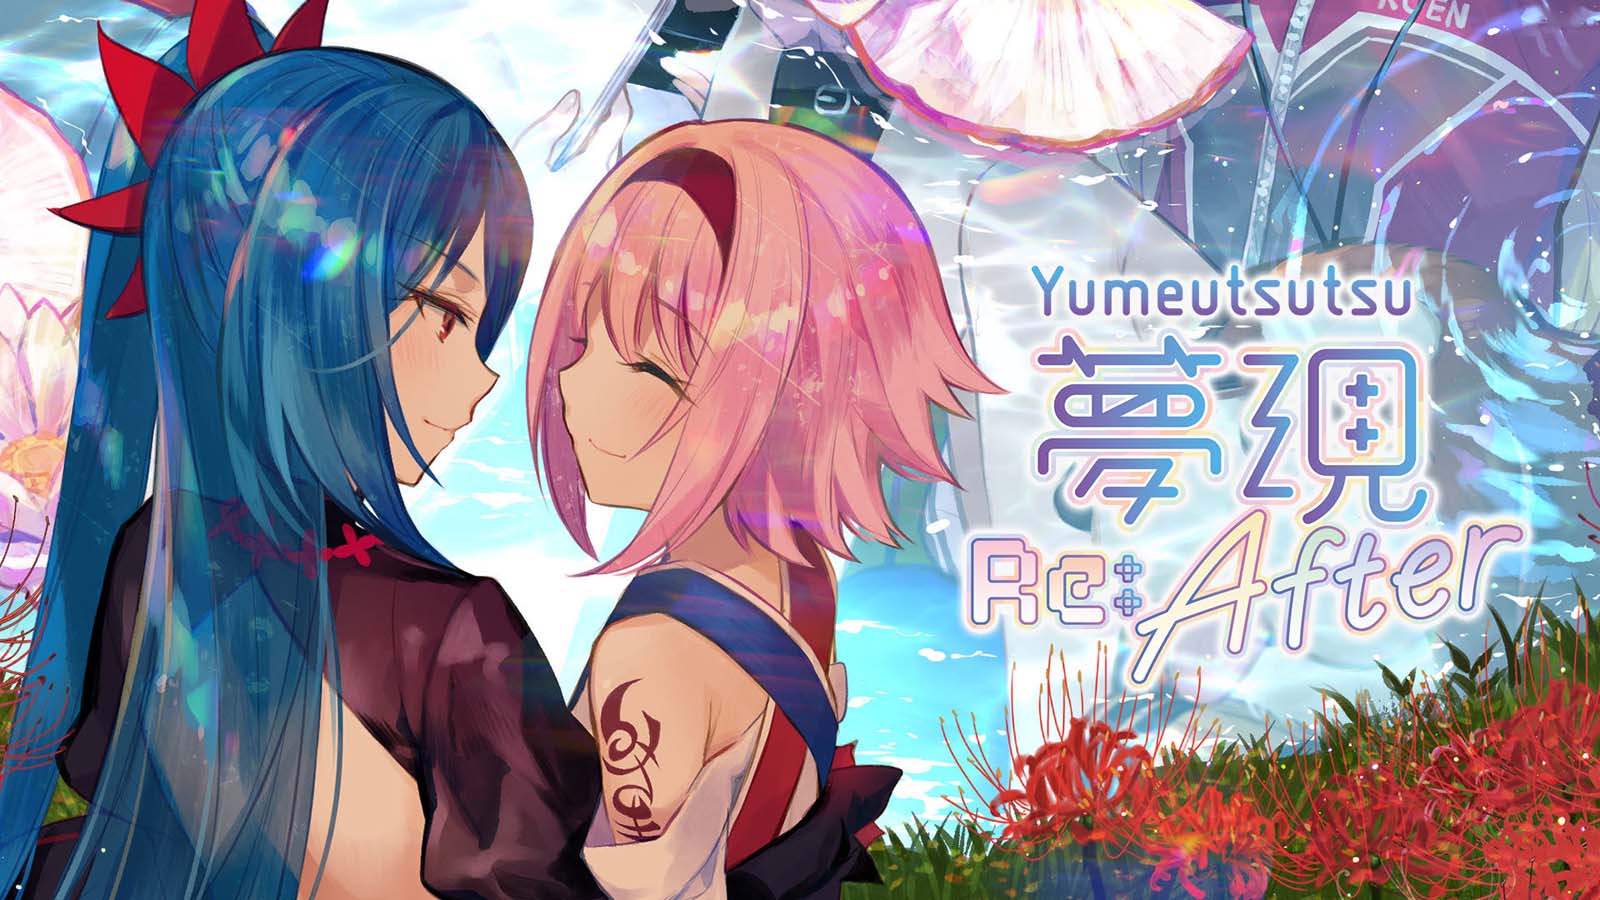 Yumeutsutsu series dual release on April 23rd on multiple platforms and in English Chinese and Japanese